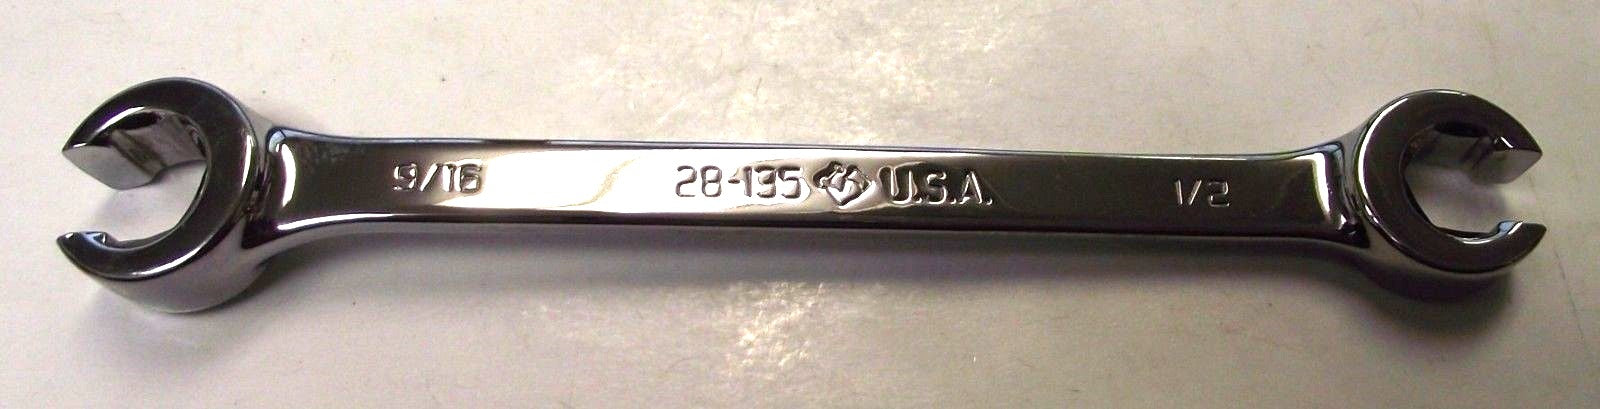 Armstrong 28-135 1/2 x 9/16" Full Polish Double Head Flare Nut Wrench USA